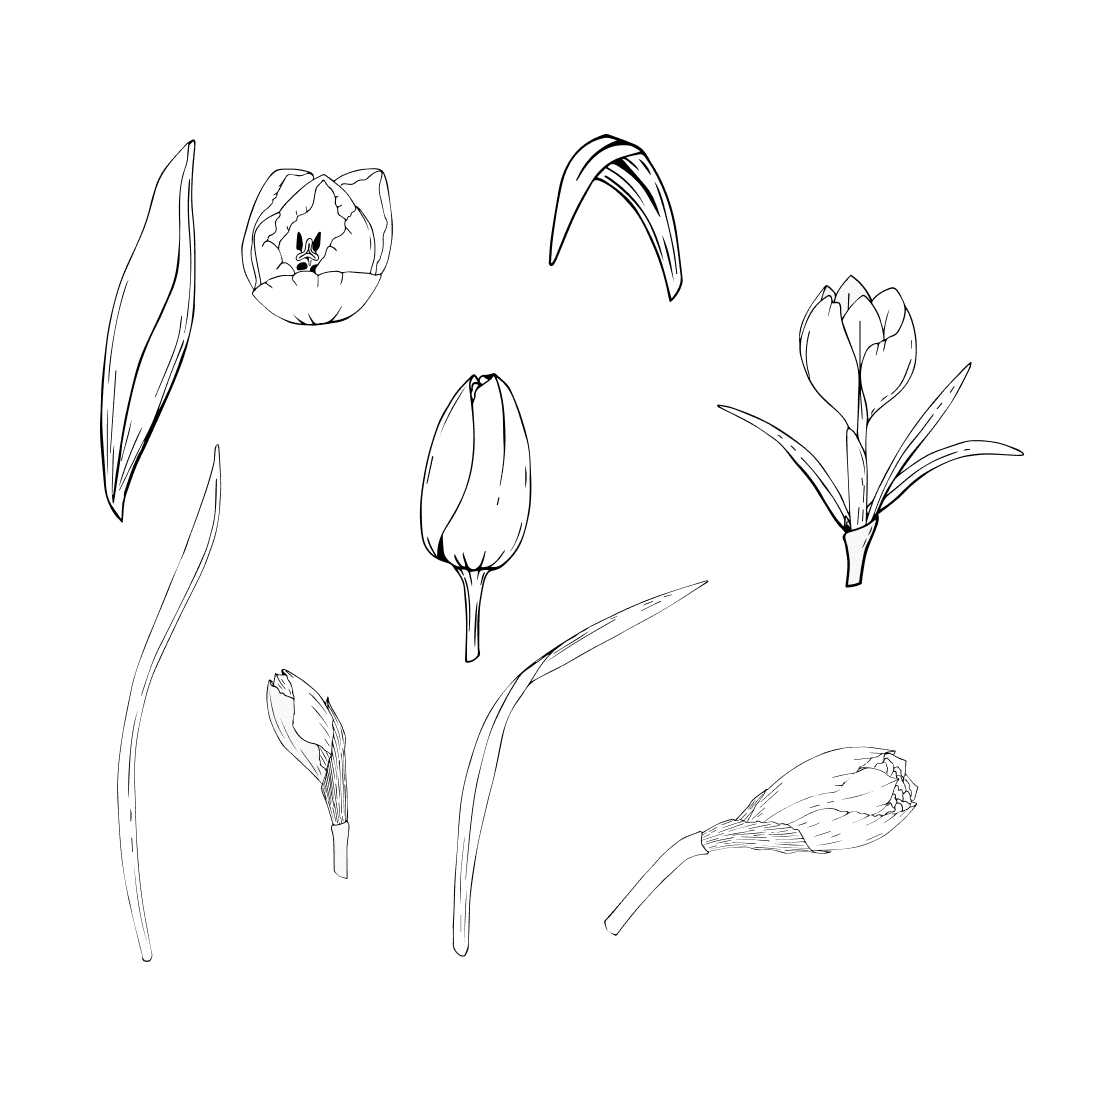 Contours of flowers and leaves of tulips.